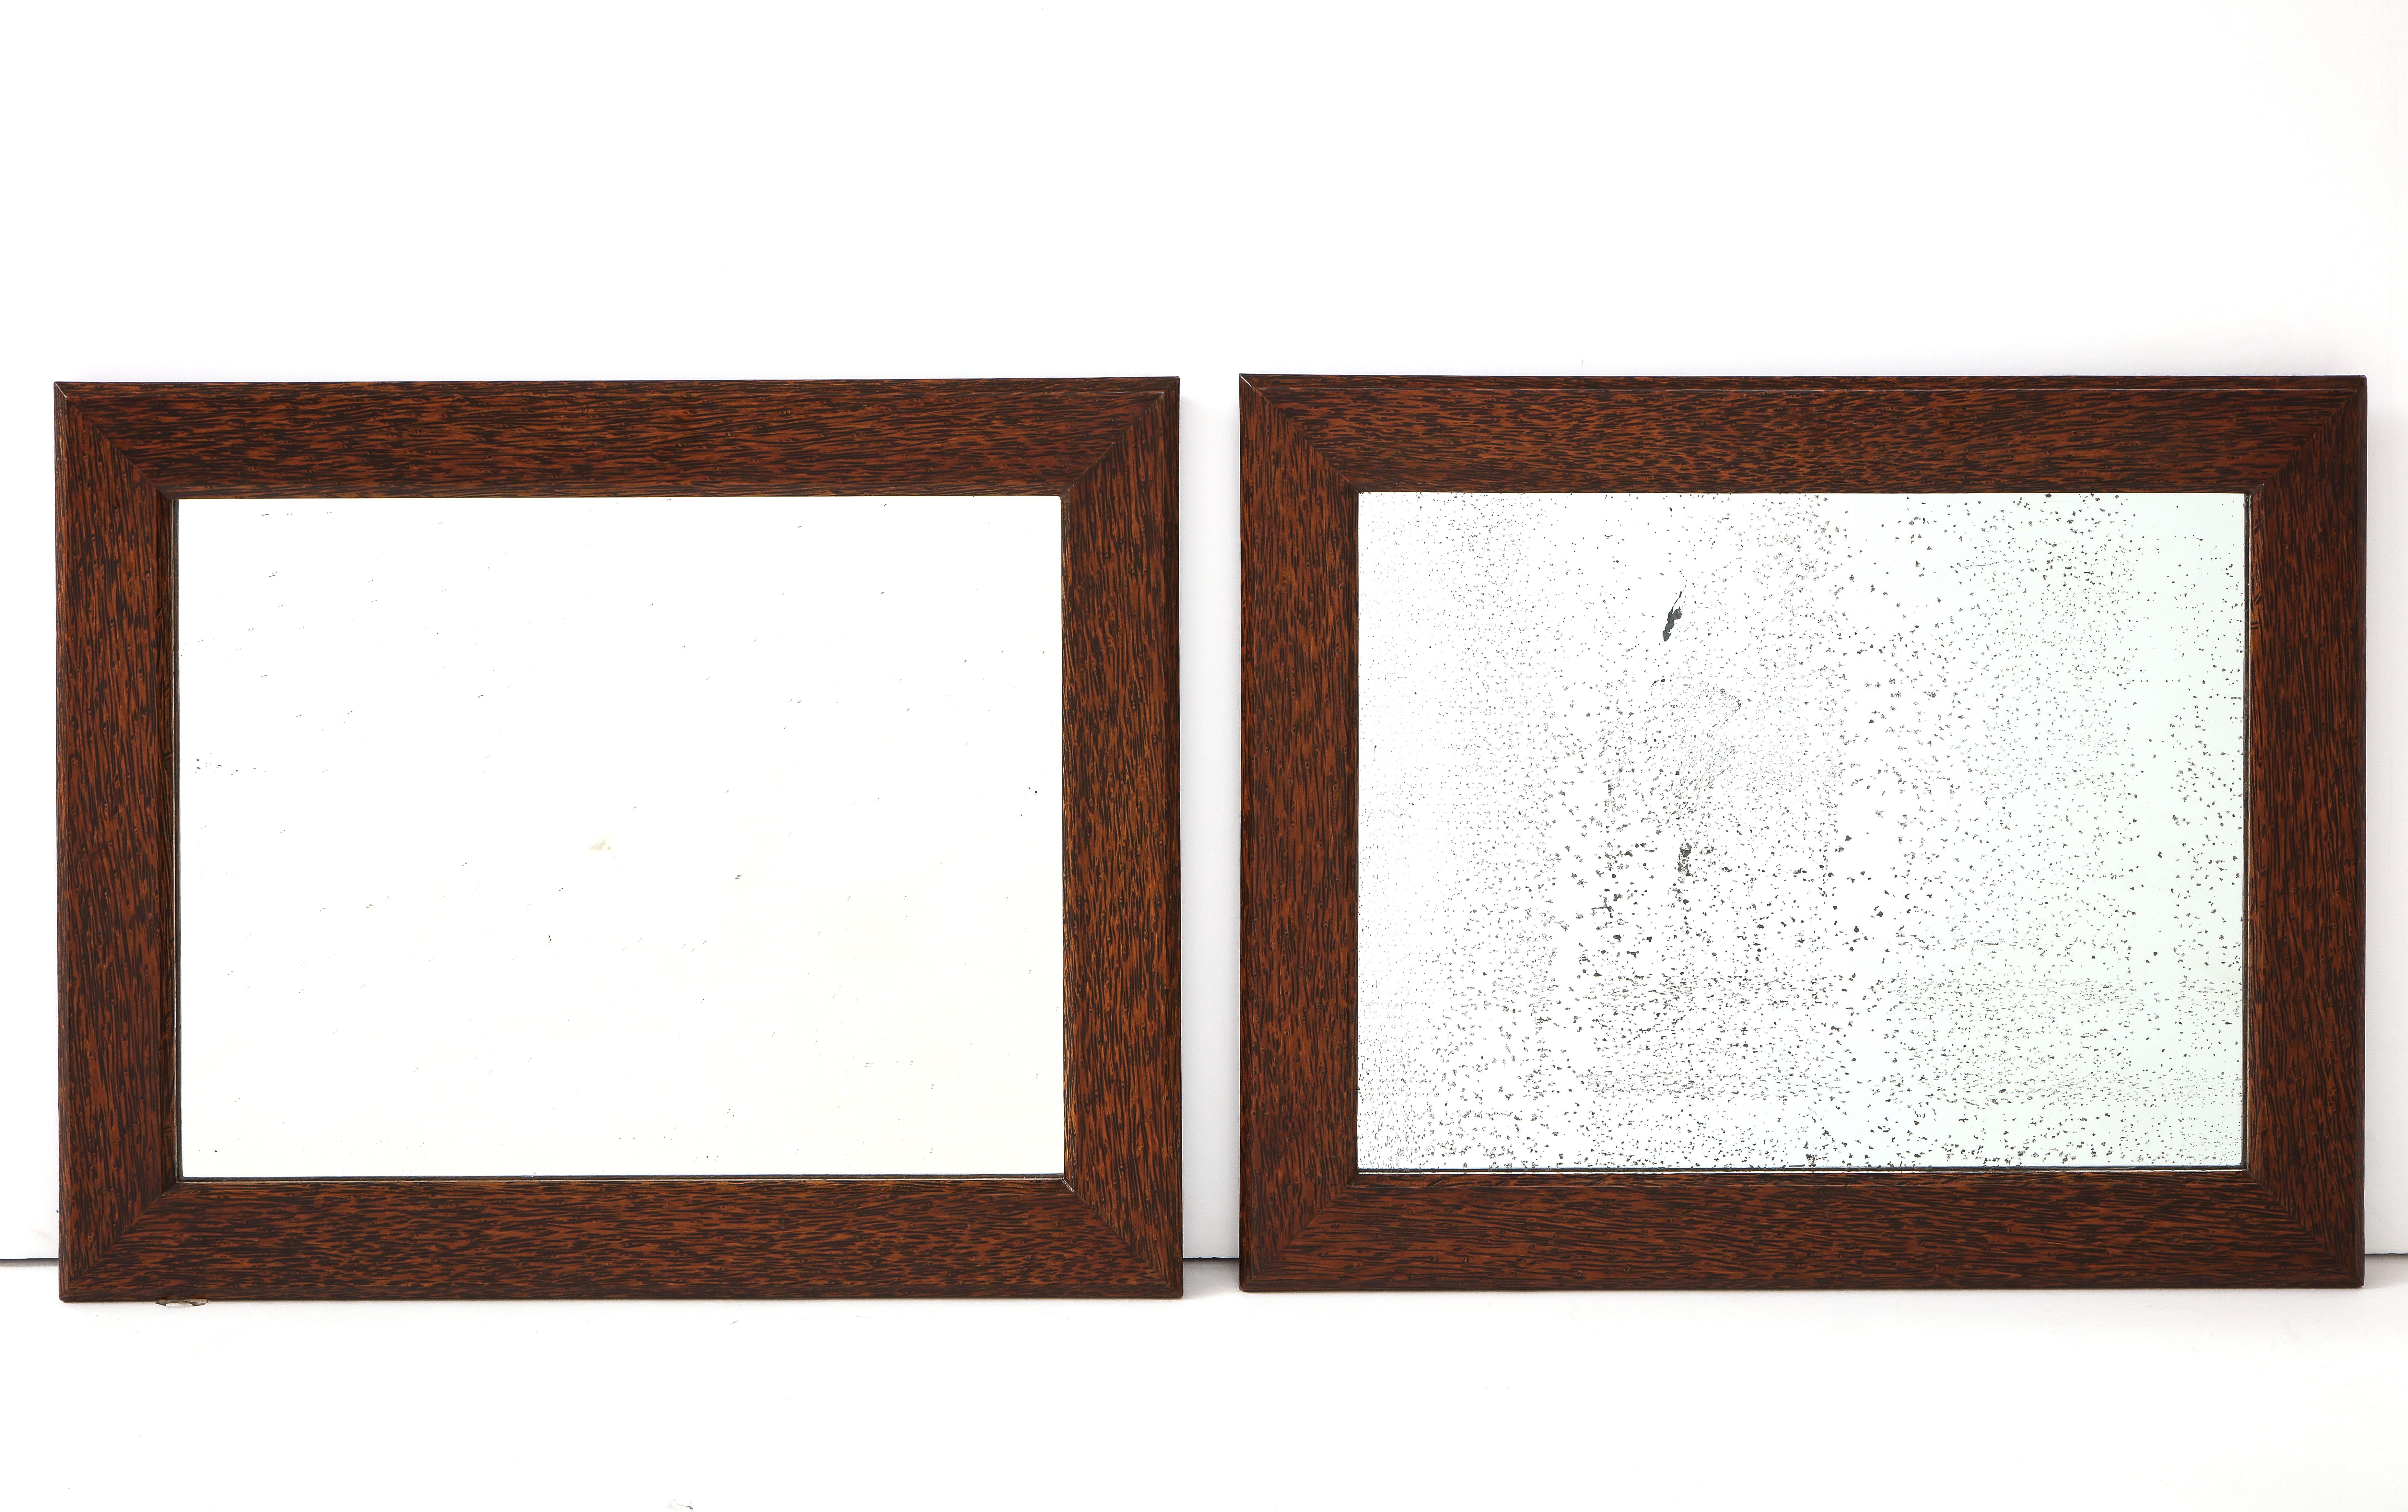 Pair of Bruxelles Art Deco mirrors, A. Leroy, Belgium, circa 1935-1940, labeled.
Palm wood, original plaquets on verso, original antique glass, second new glass, (both usable, we can make both new glass if desired)

Size: H 17.5, D 21 in. each.